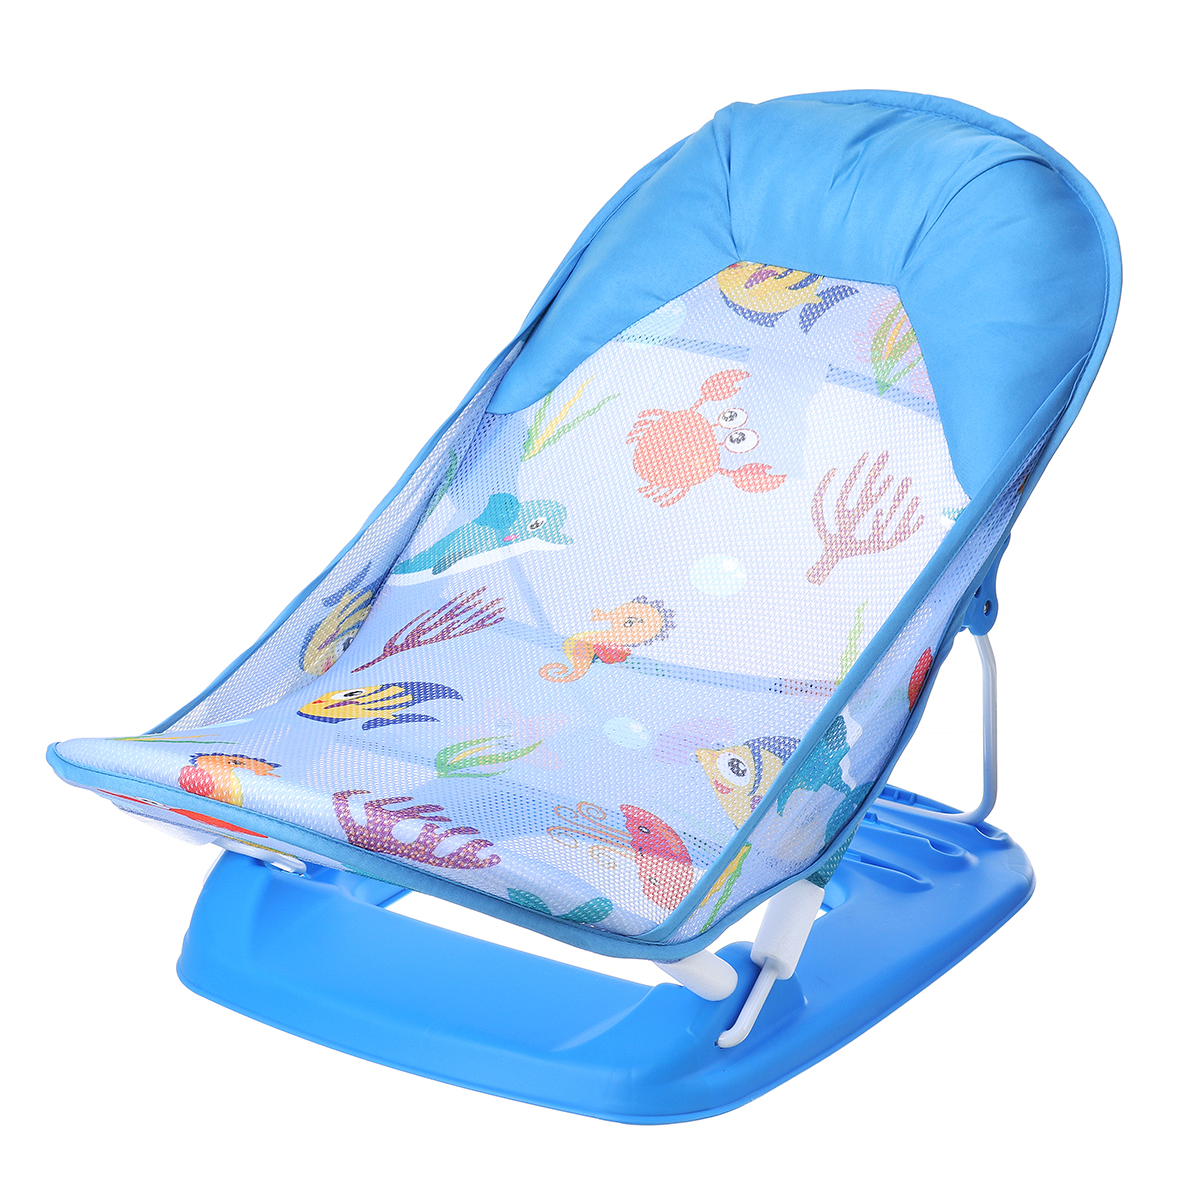 Baby-Swing-Seat-Folding-Portable-Baby-Bath-Shower-Chair-for-012-Month-Baby-1878834-3